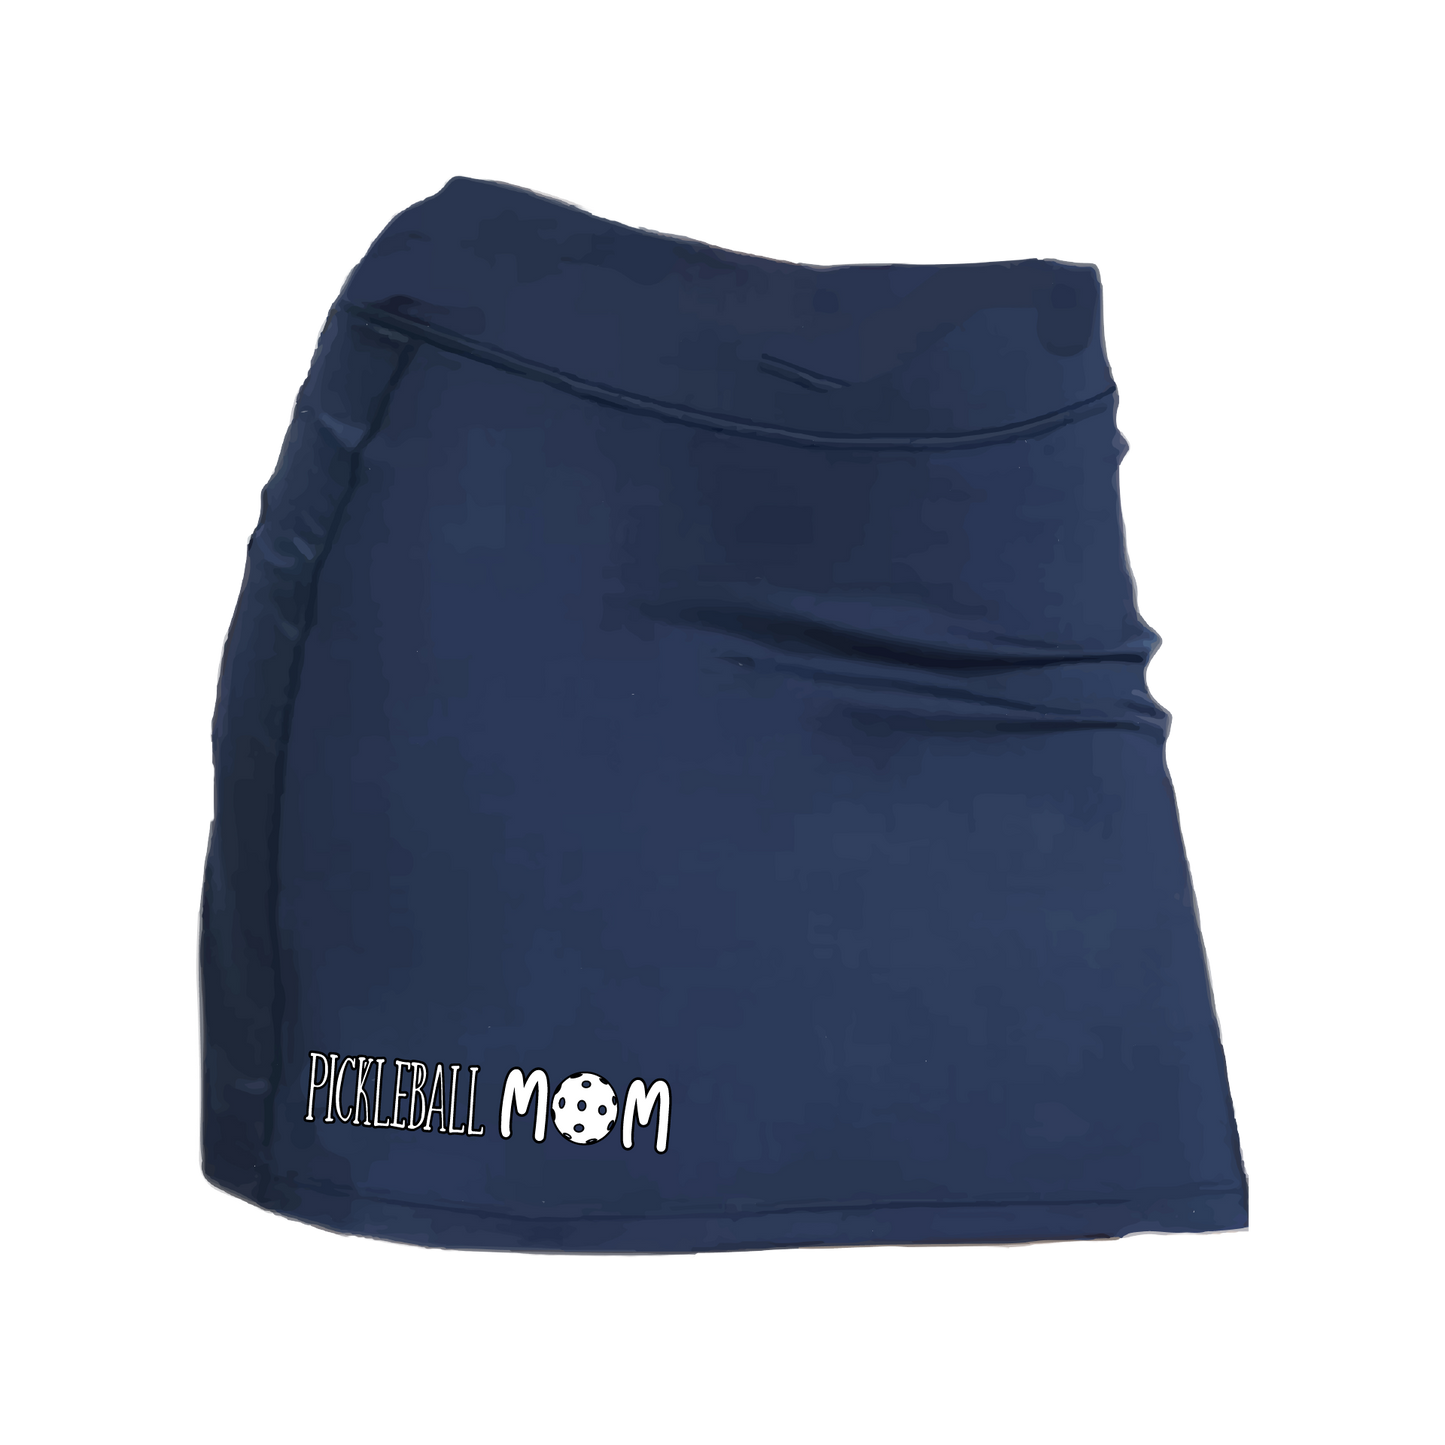 Pickleball Skort Design: Pickleball Mom  Women’s core active jersey-knit skort comes with built-in shorts made out of a poly-spandex blend that will keep your legs from rubbing together, without which often results in painful chafing. You can also feel secure knowing that no matter how strenuous the exercise, the skort will remain in place (it won’t ride up!). 